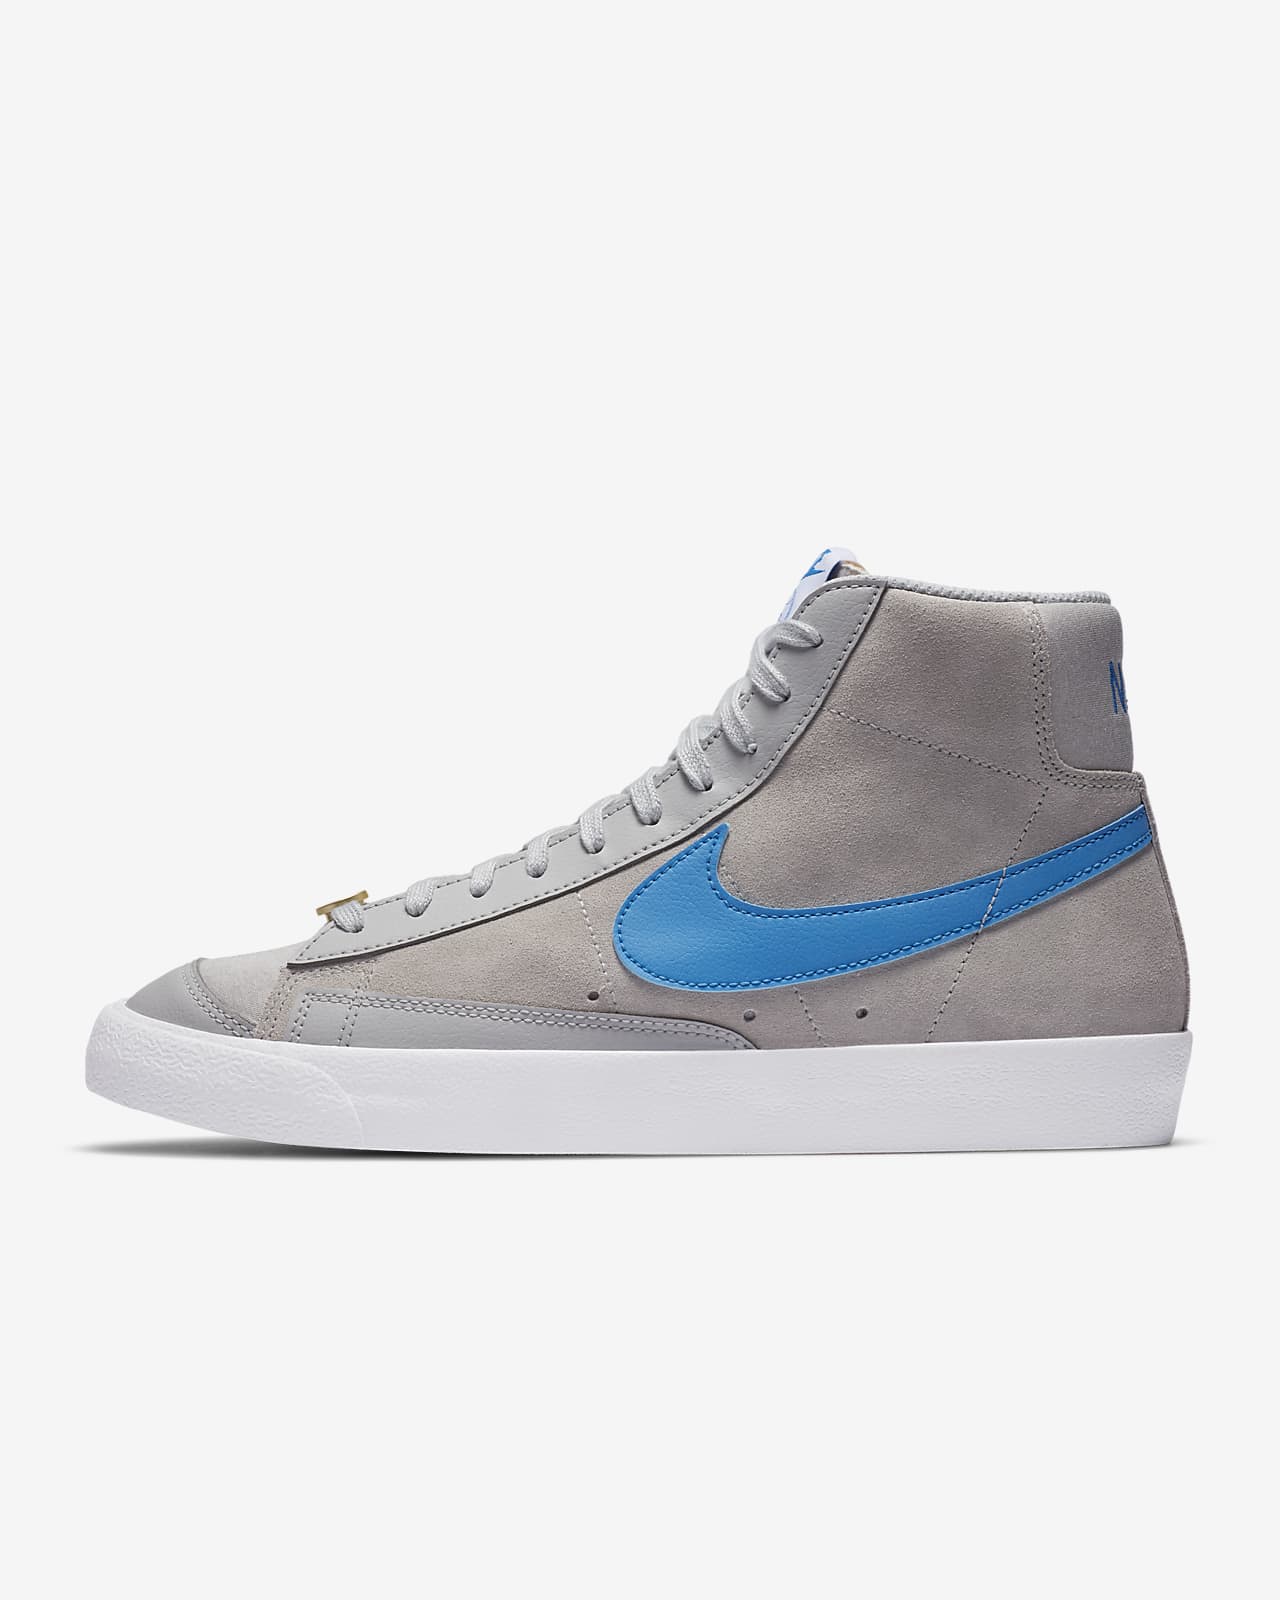 Nike Blazer High Top Sale Online, UP TO 66% OFF